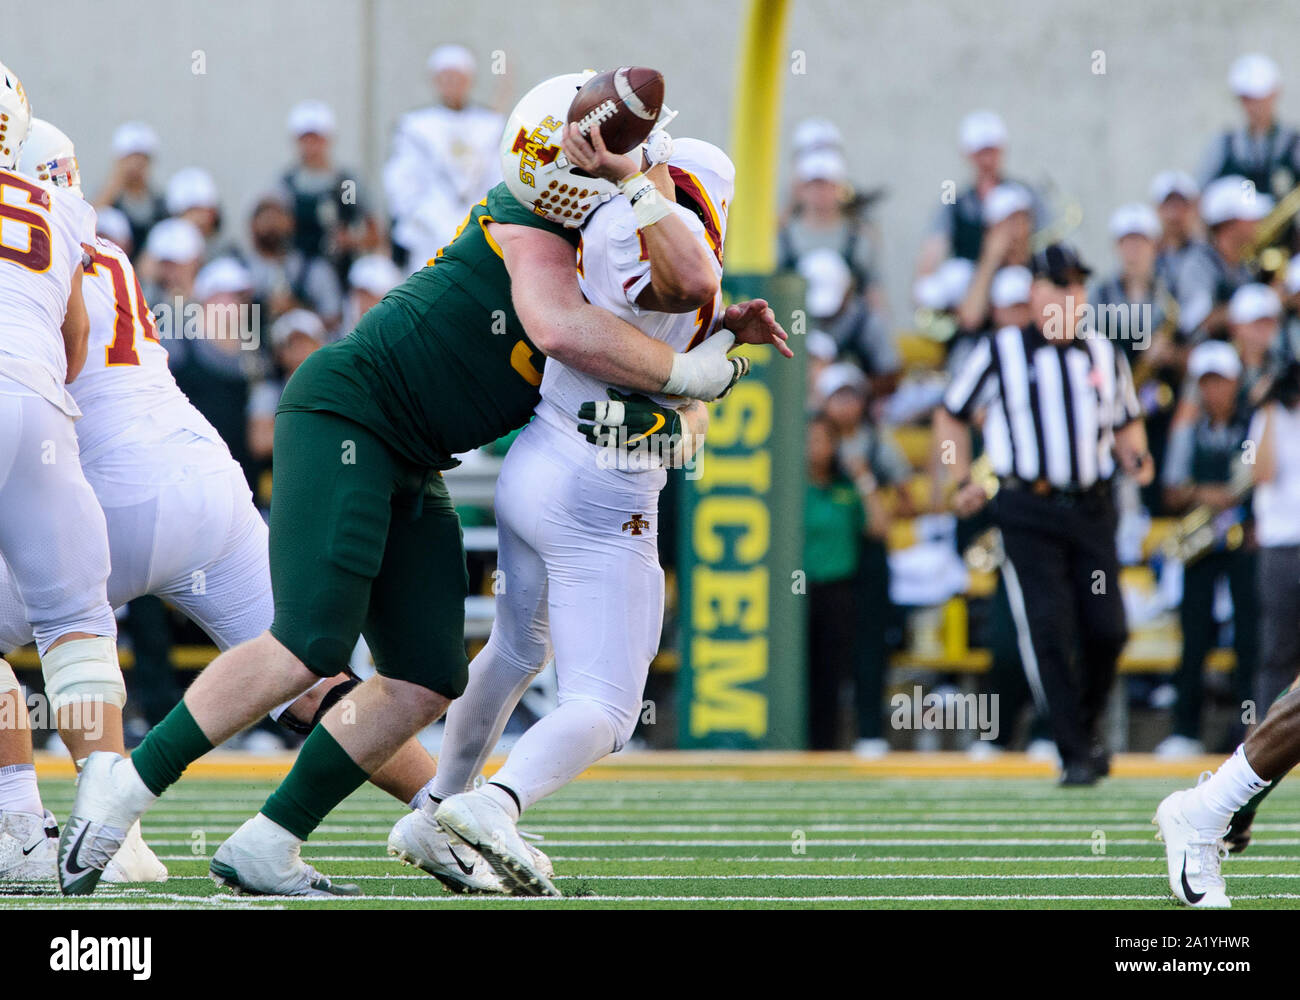 Waco, Texas, USA. 28th Sep, 2019. Baylor Bears defensive tackle James Lynch (93) tries to sack Iowa State Cyclones quarterback Brock Purdy (15) during the 2nd half of the NCAA Football game between Iowa State Cyclones and the Baylor Bears at McLane Stadium in Waco, Texas. Matthew Lynch/CSM/Alamy Live News Stock Photo